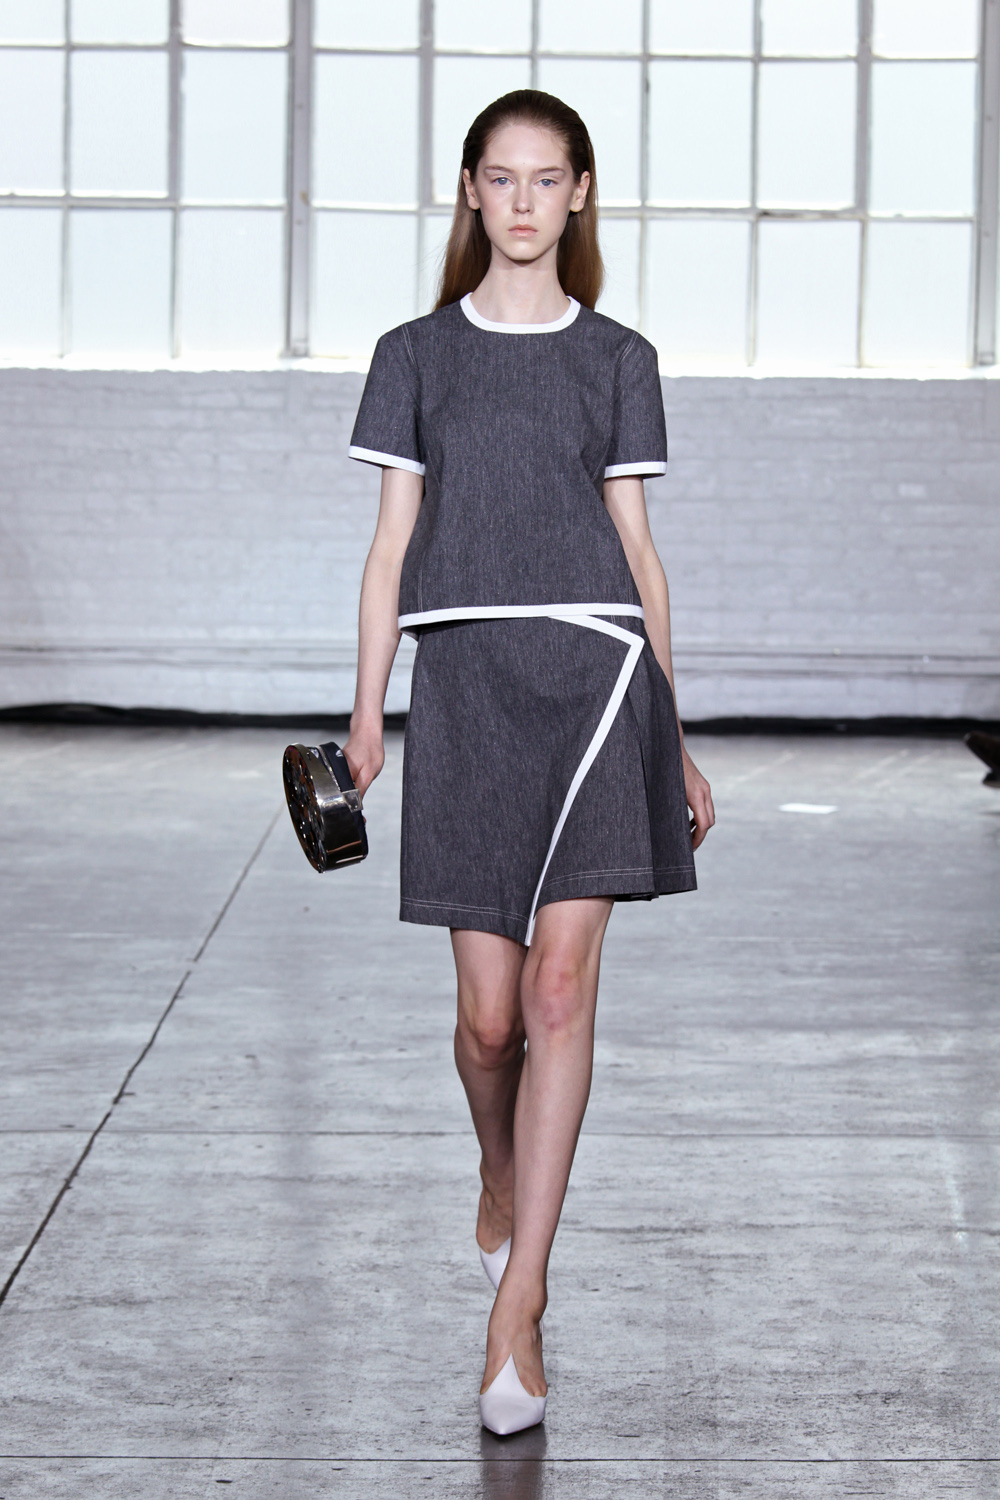 Tanya Taylor S/S '14 + Interview